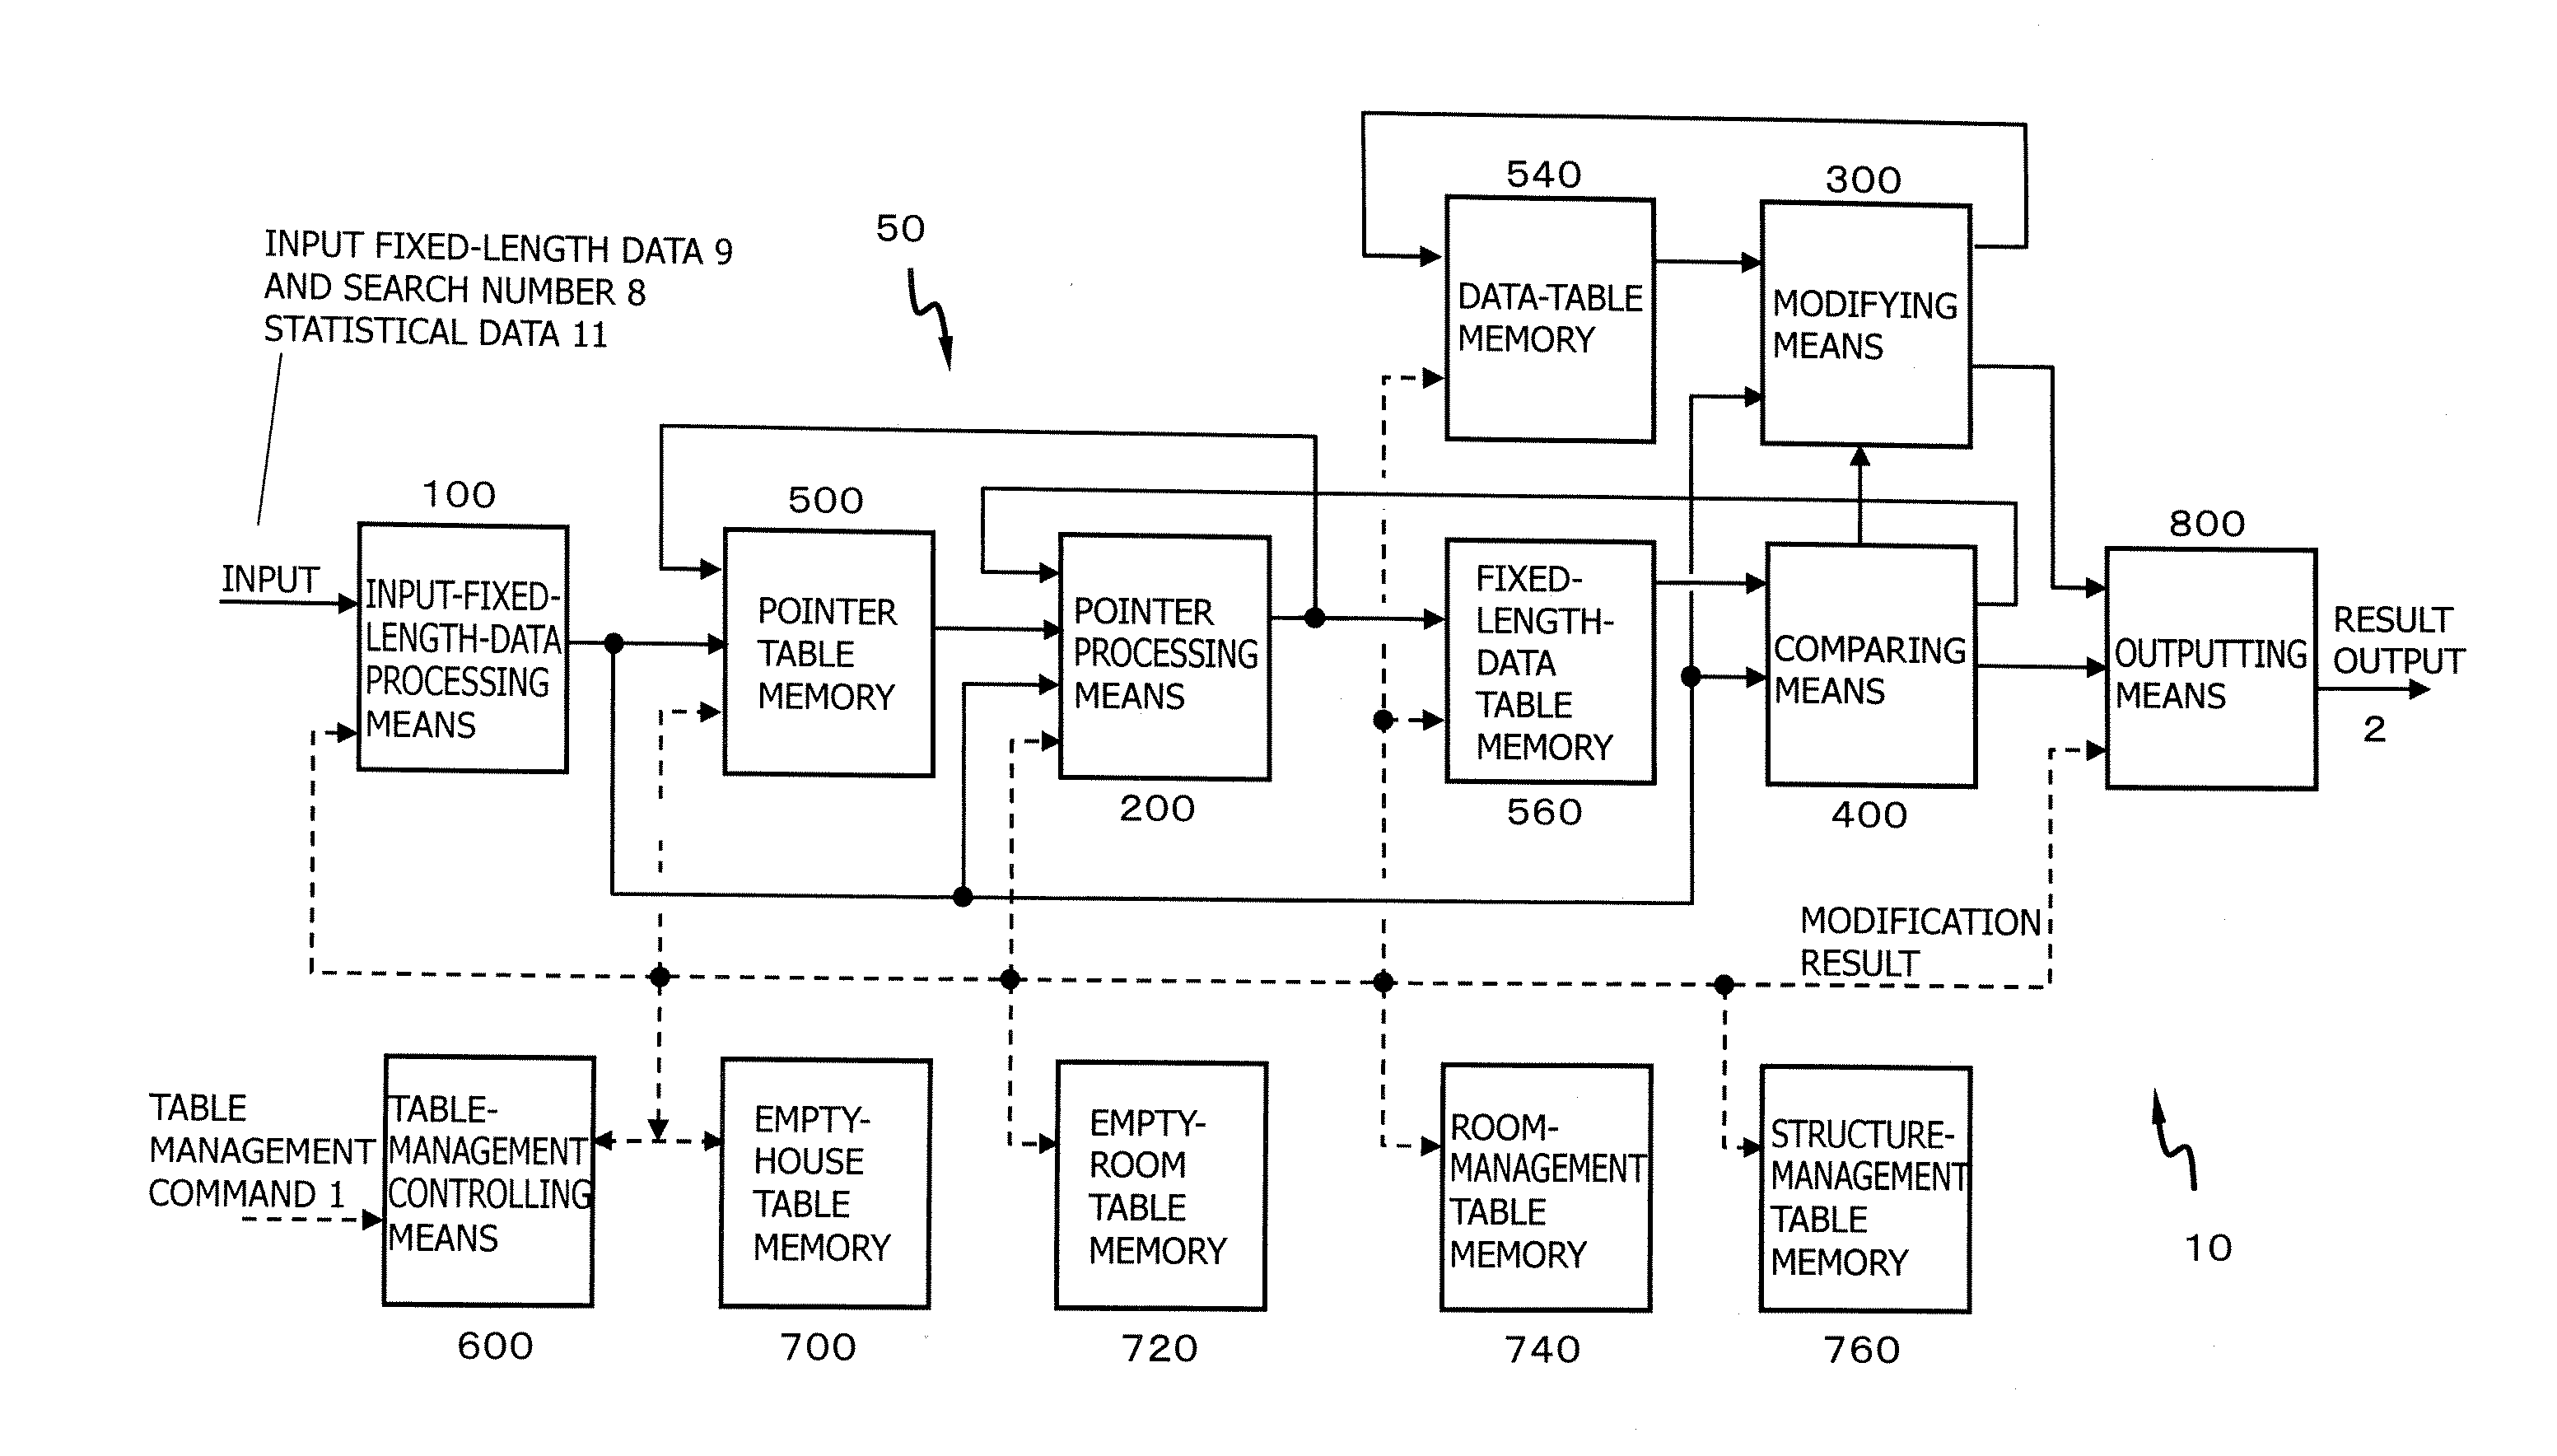 Search apparatus and search management method for fixed-length data